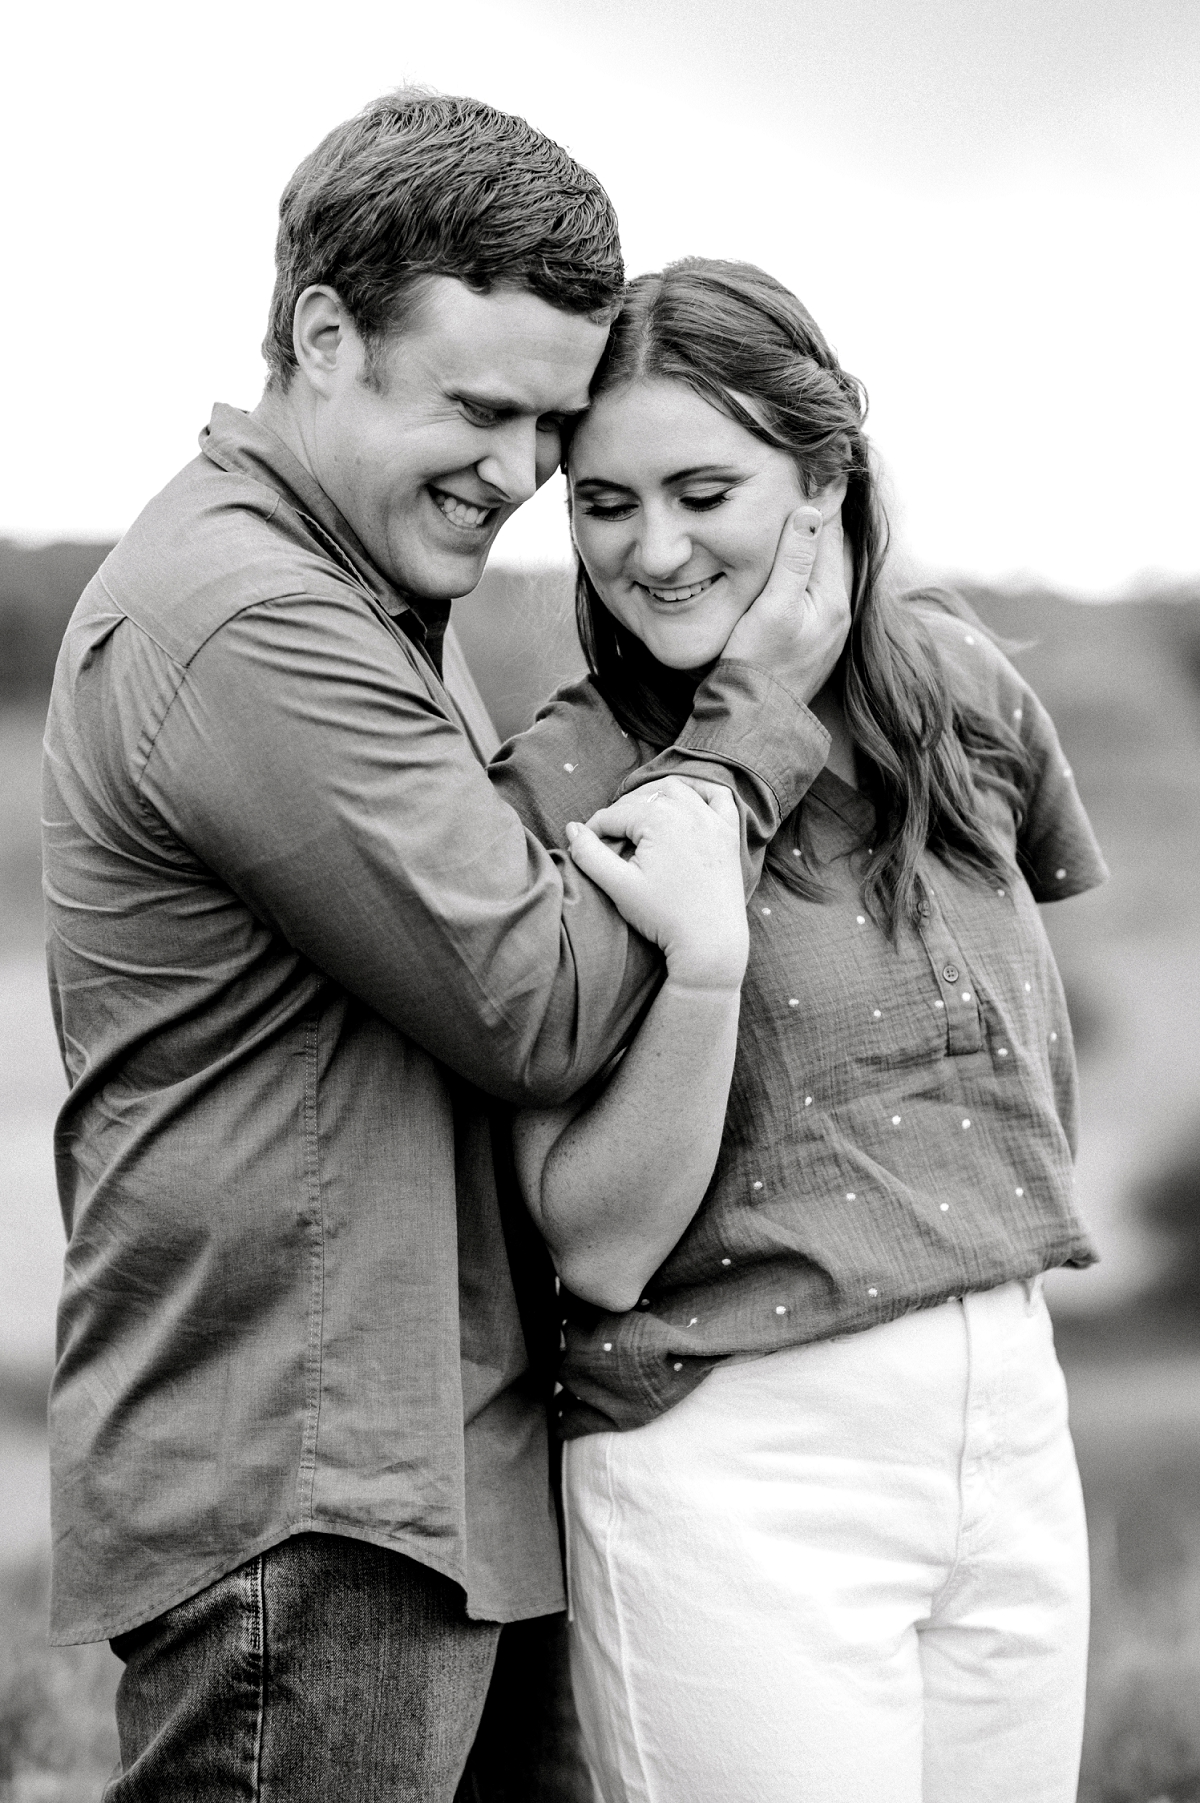 kelly canyon engagement session